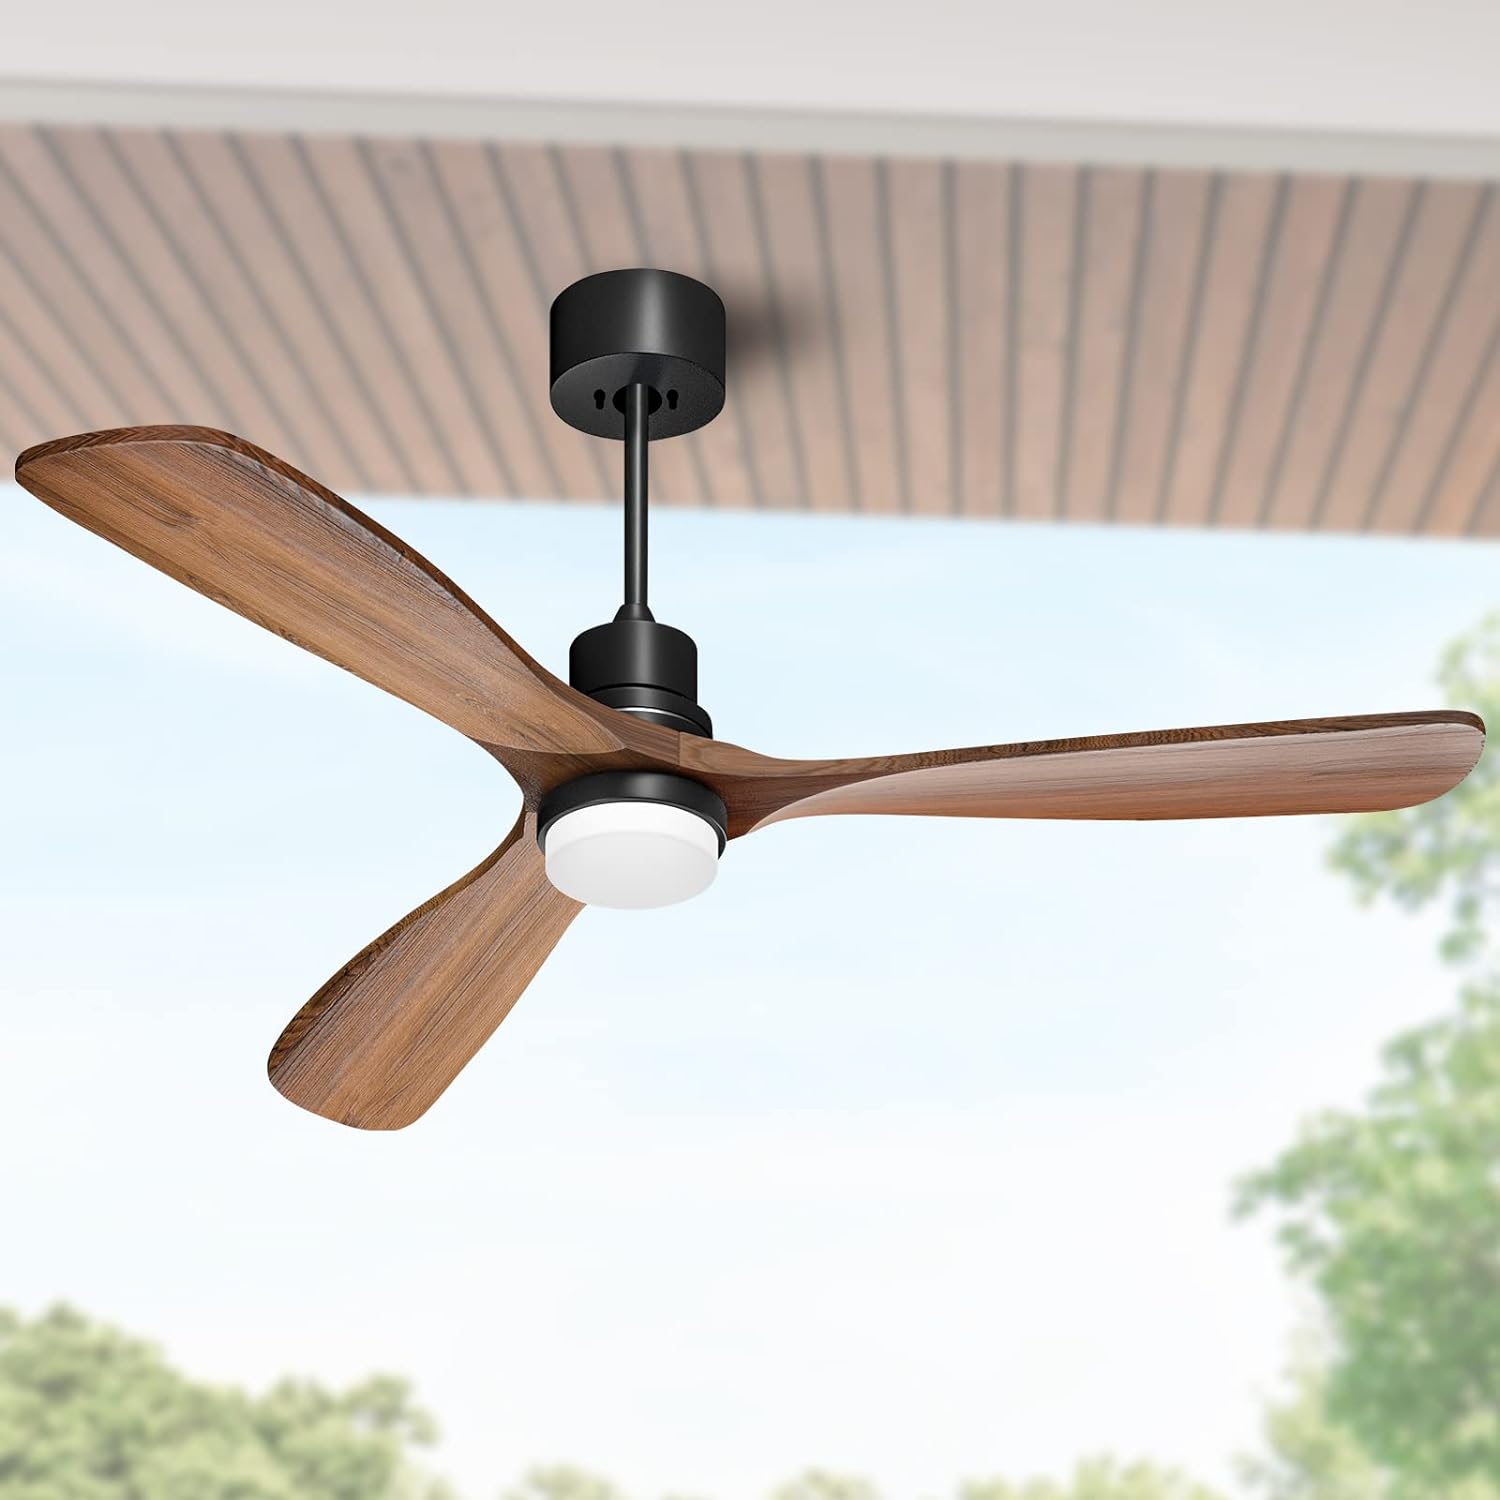 Obabala 52 Ceiling Fan with Lights Remote Control Outdoor Wood Ceiling Fans Noiseless Reversible DC Motor